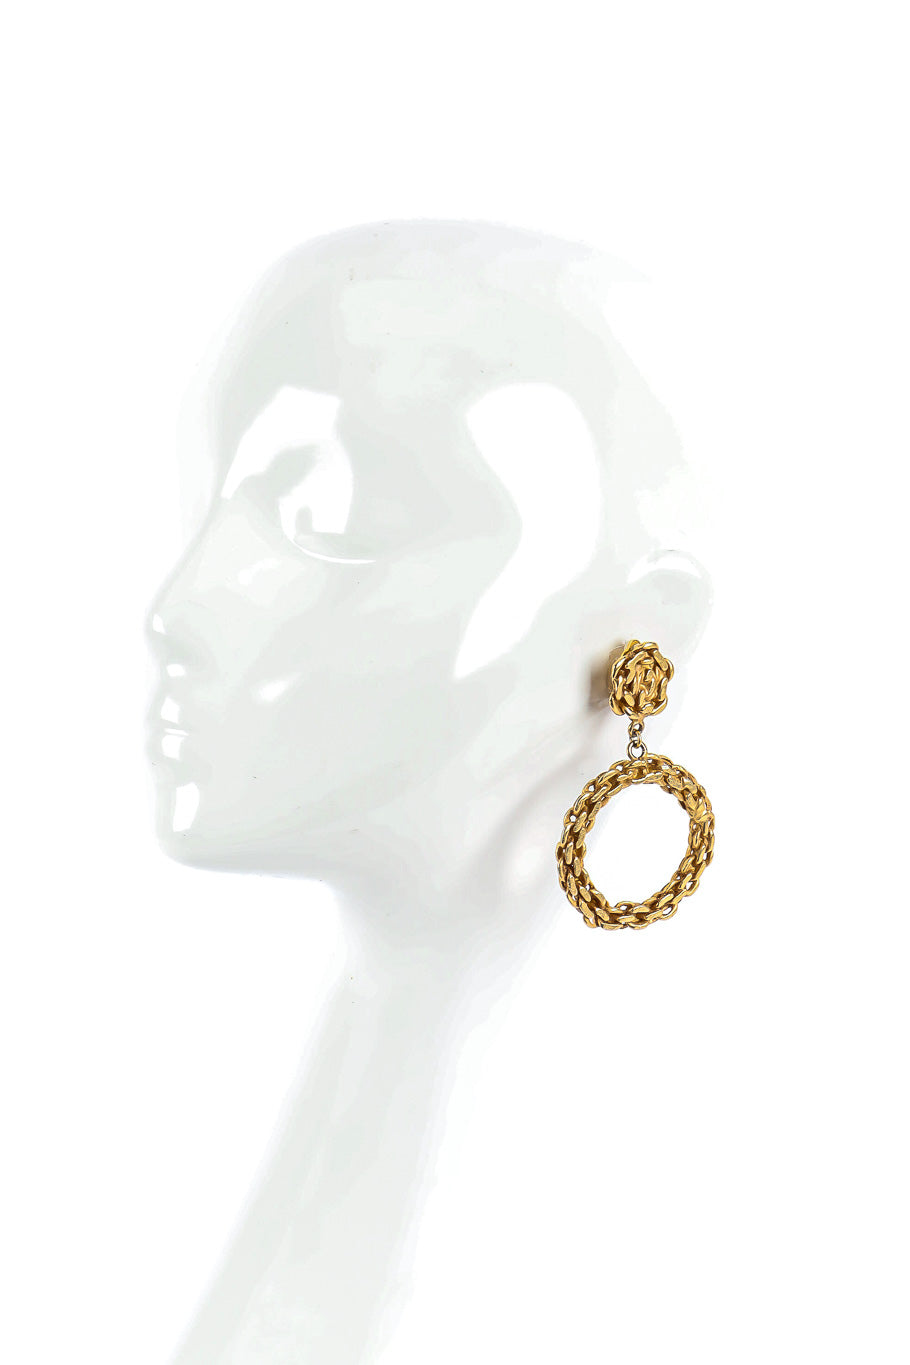 Statement wound chain hoop earrings by Donna Karan New York Photo on Mannequin @recessla